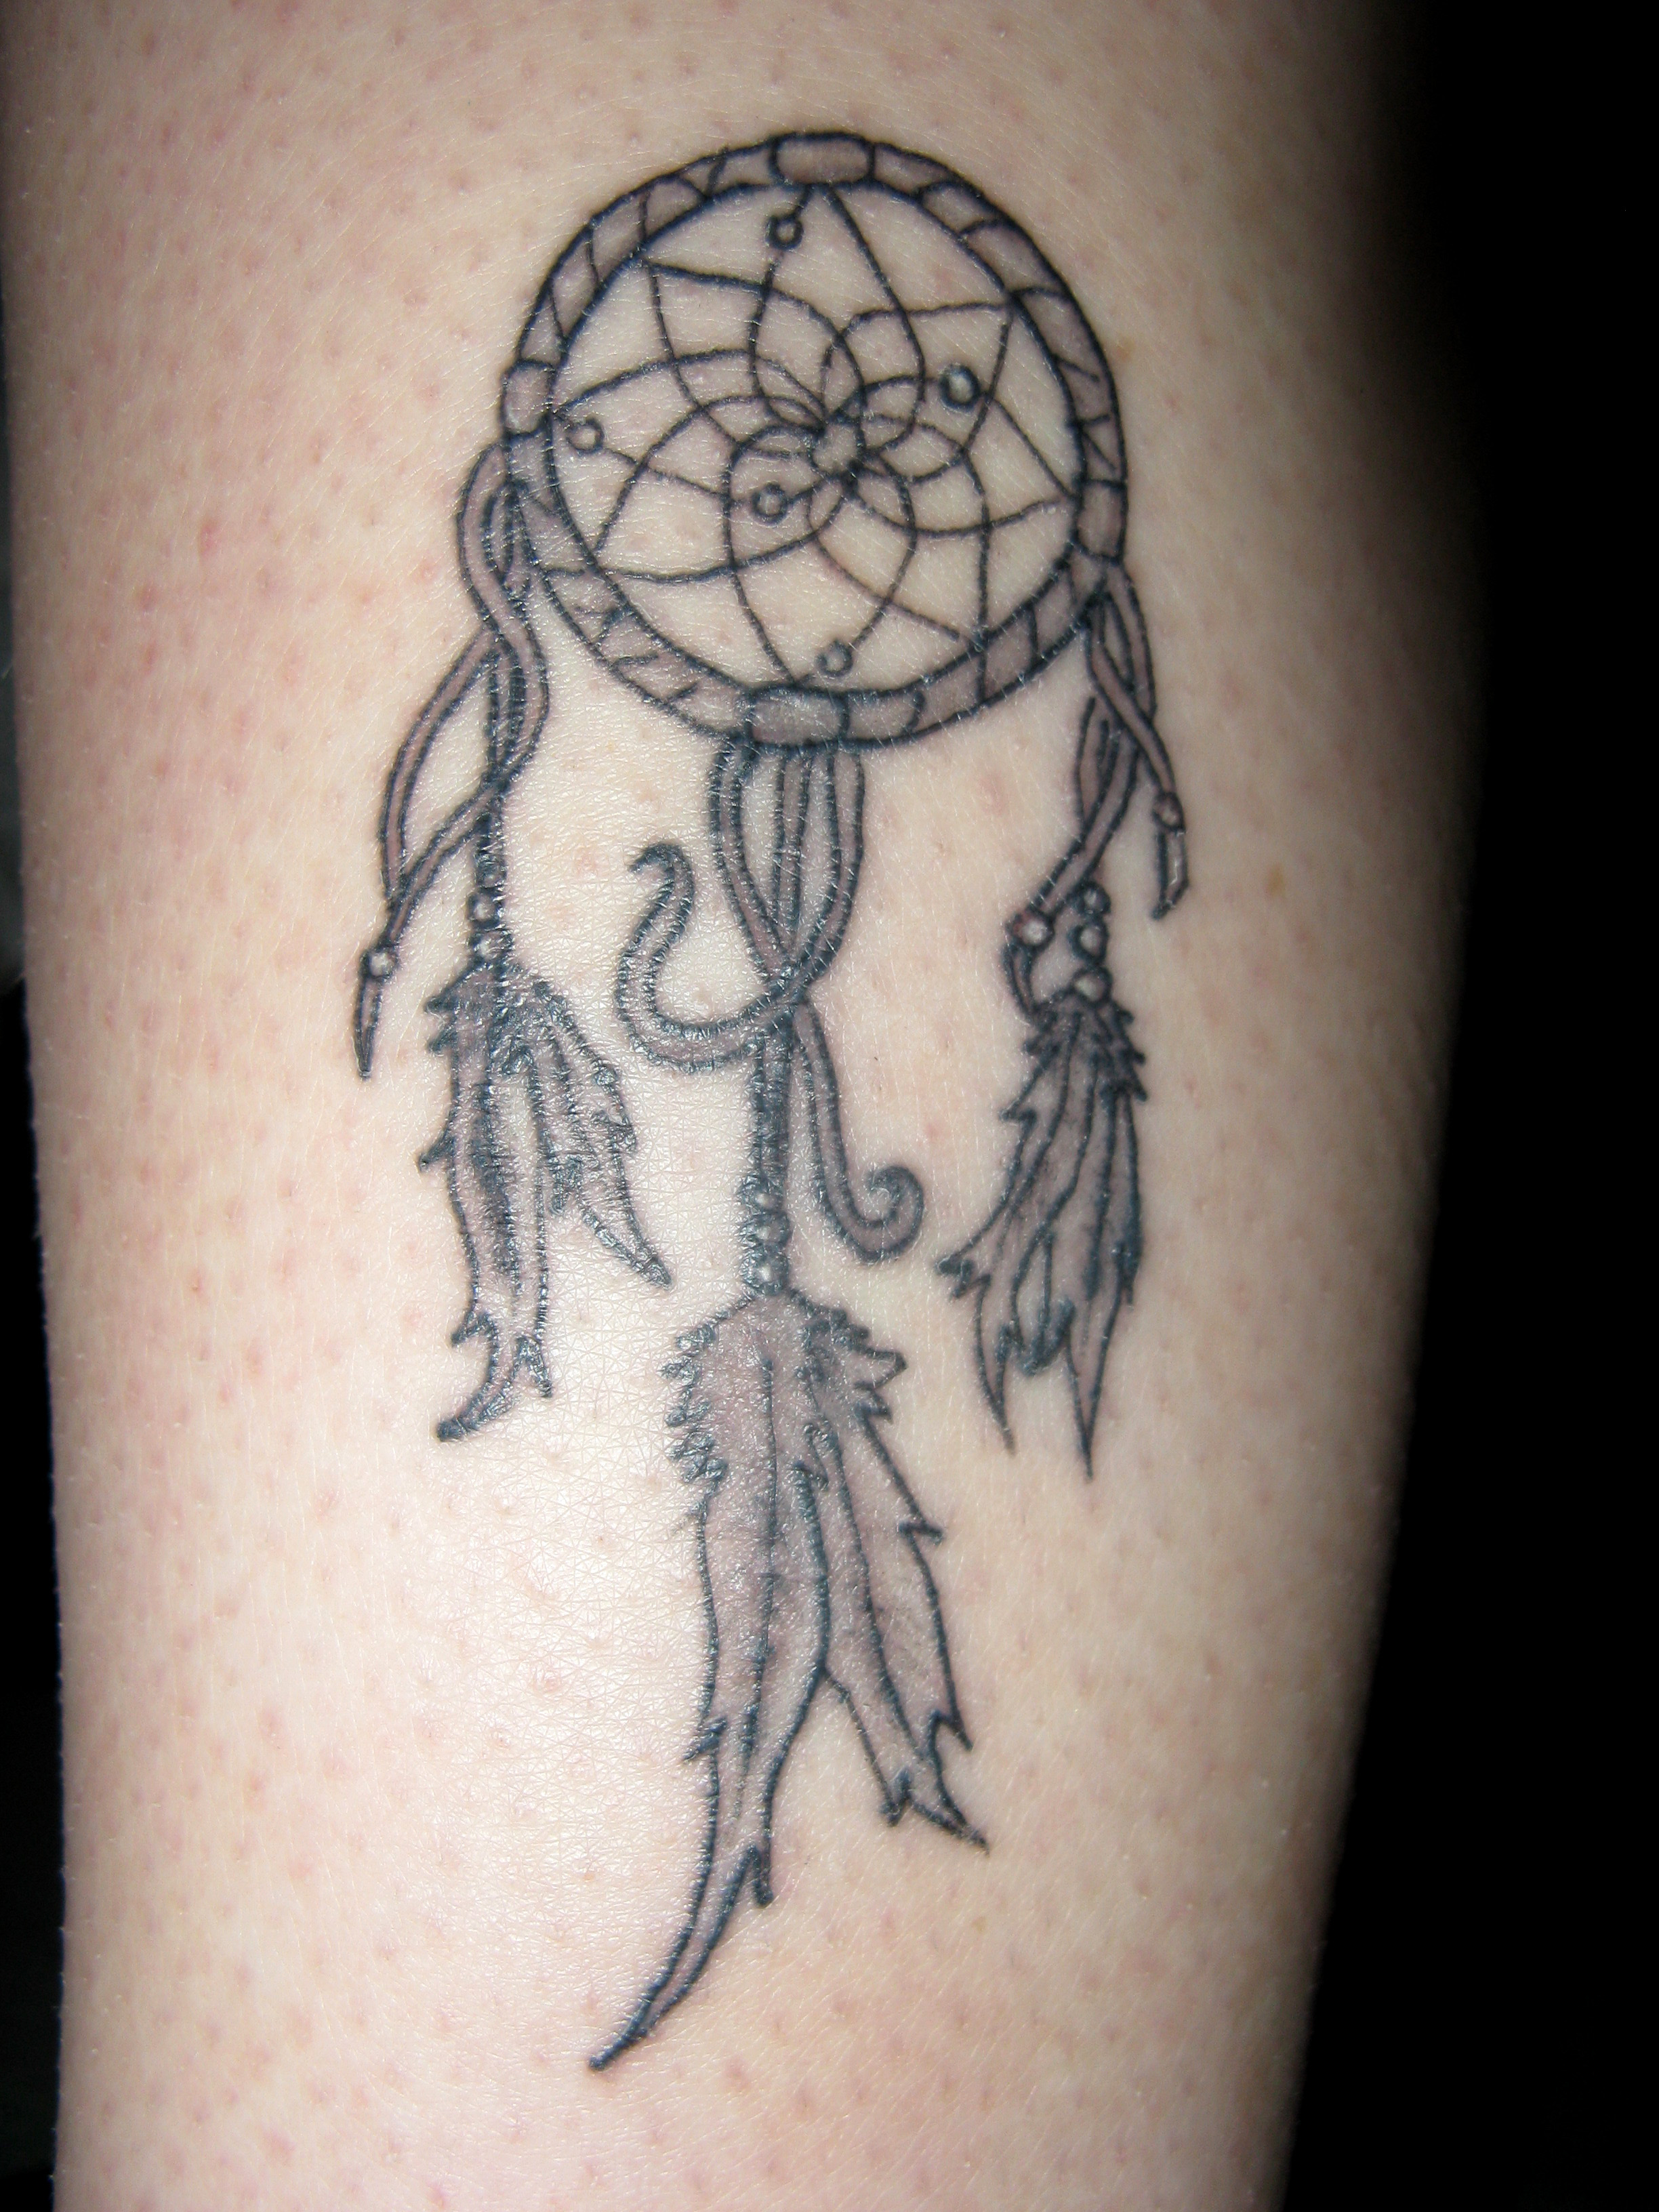 Dreamcatcher Tattoos Designs Ideas and Meaning Tattoos For You